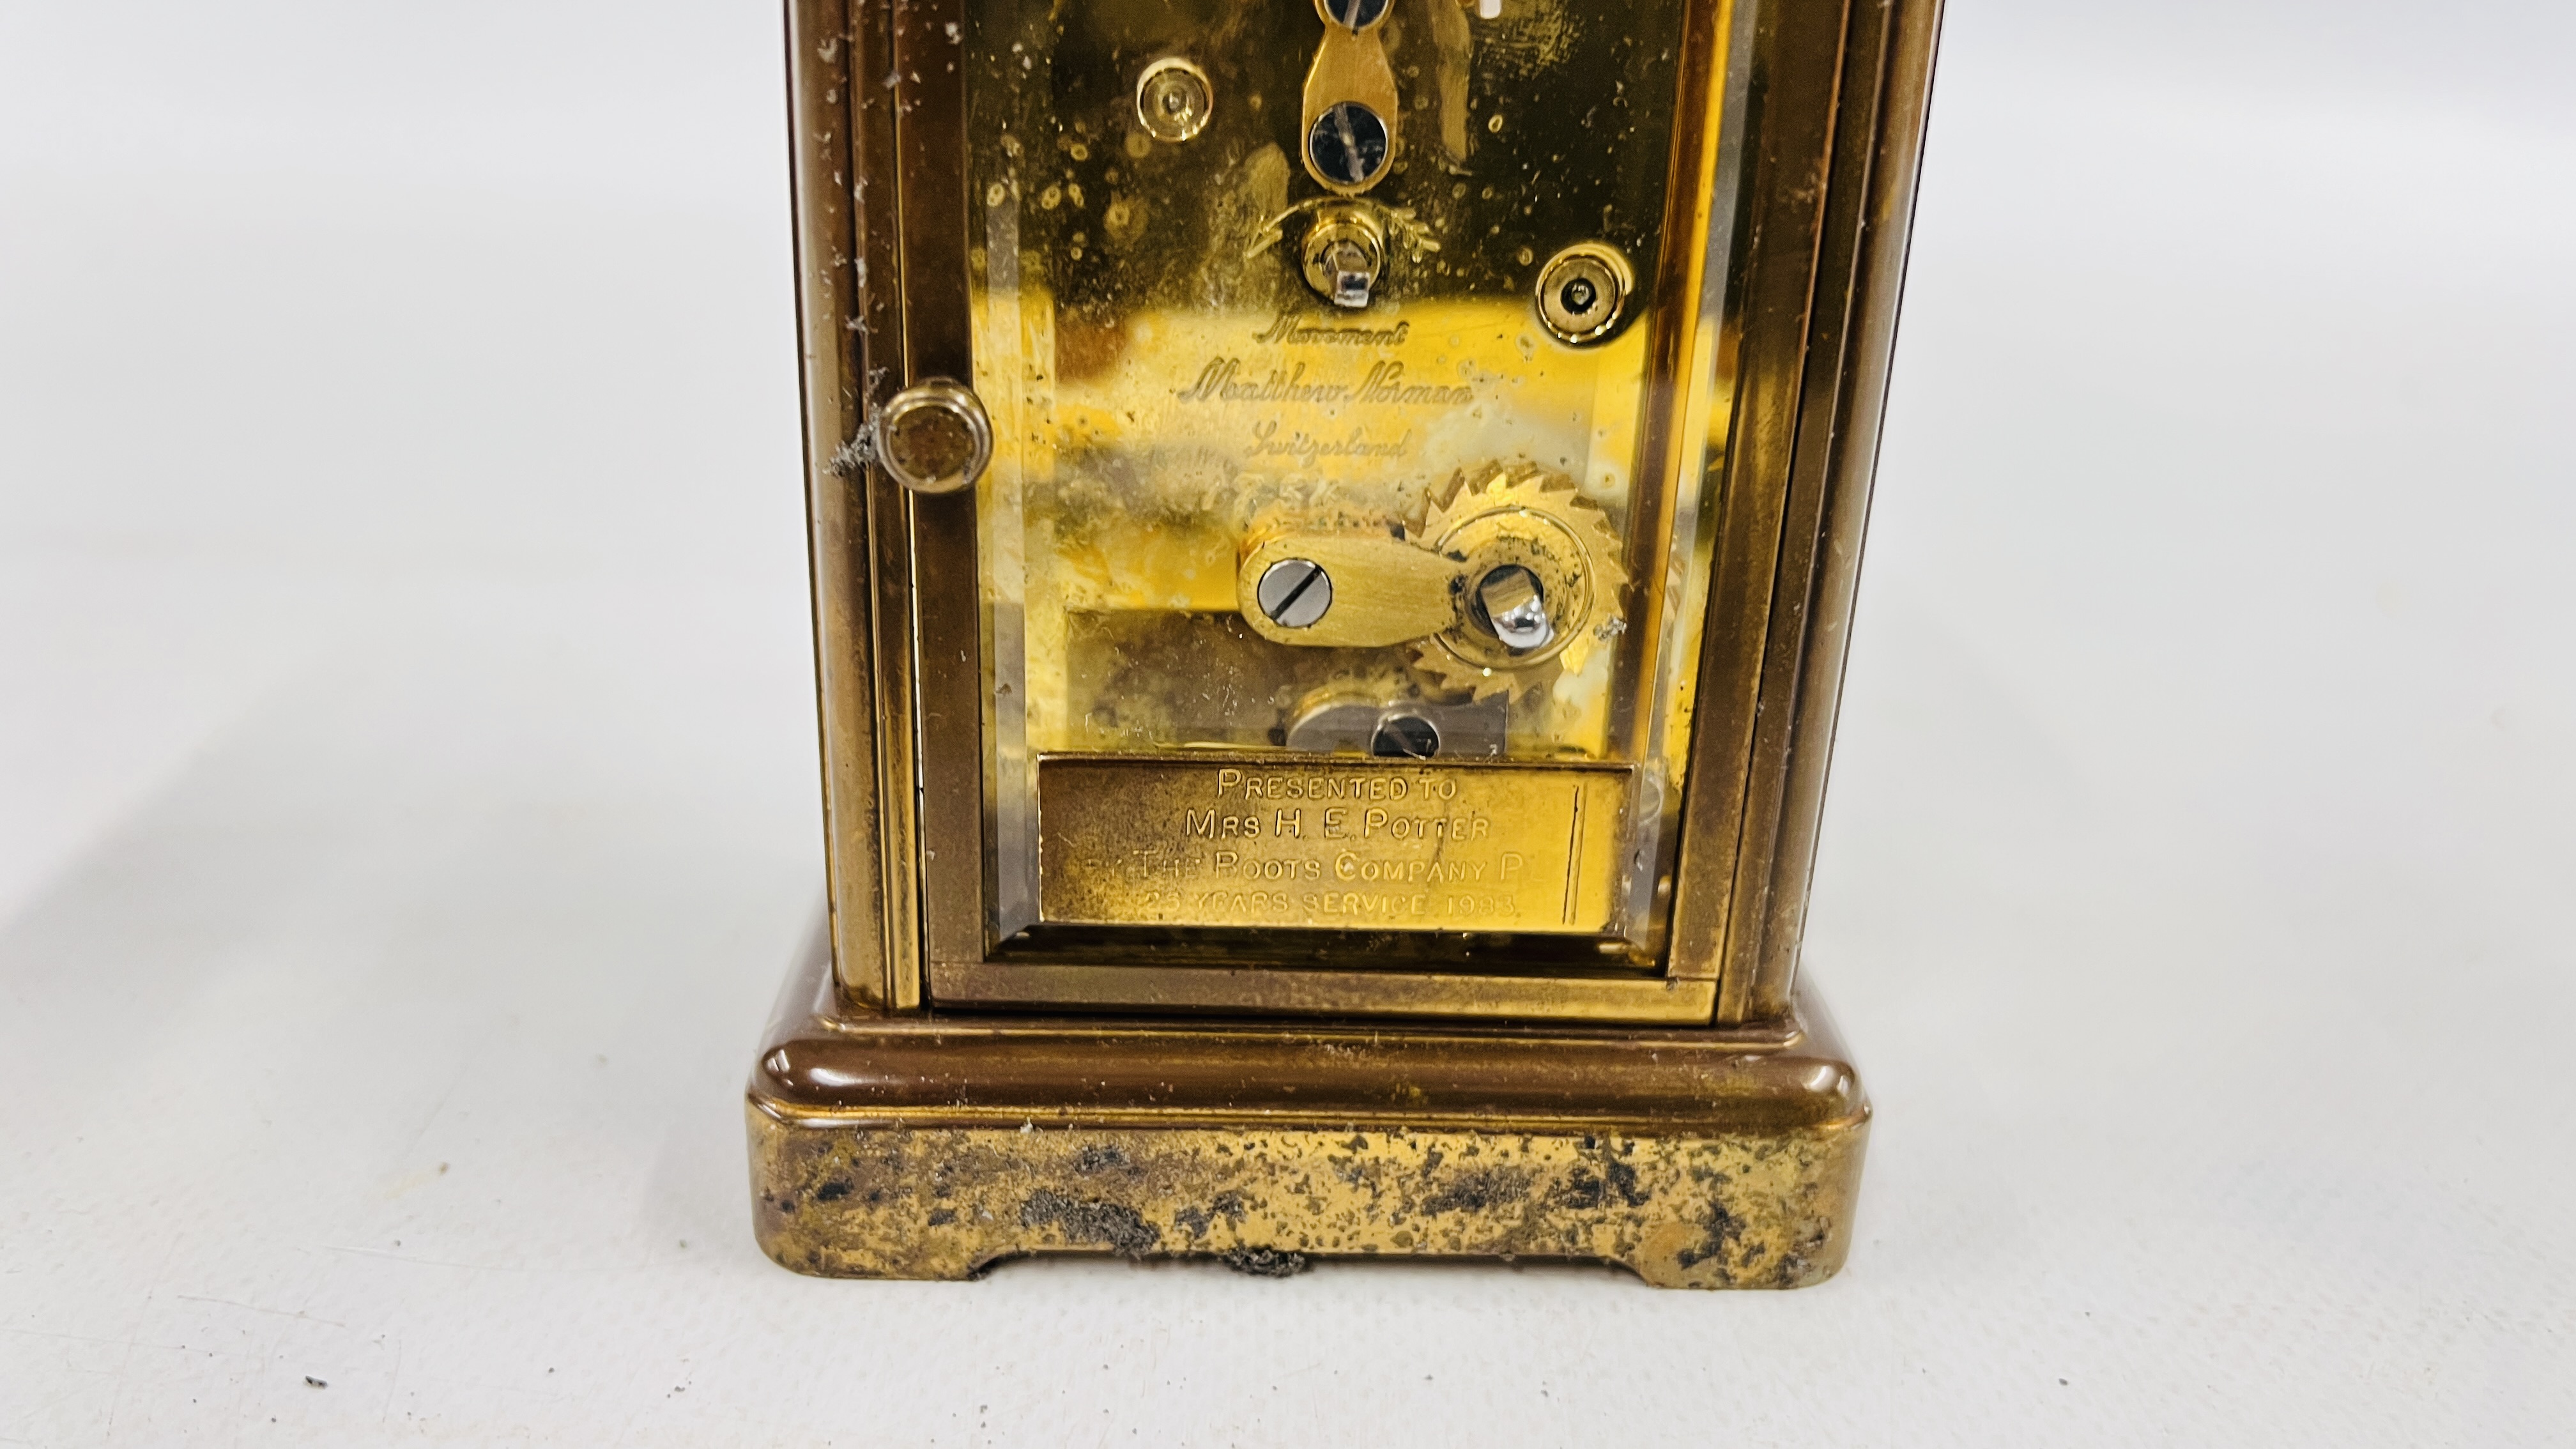 A MATTHEW NORMAN BRASS CASED CARRIAGE CLOCK WITH ORIGINAL BOX. - Image 7 of 9